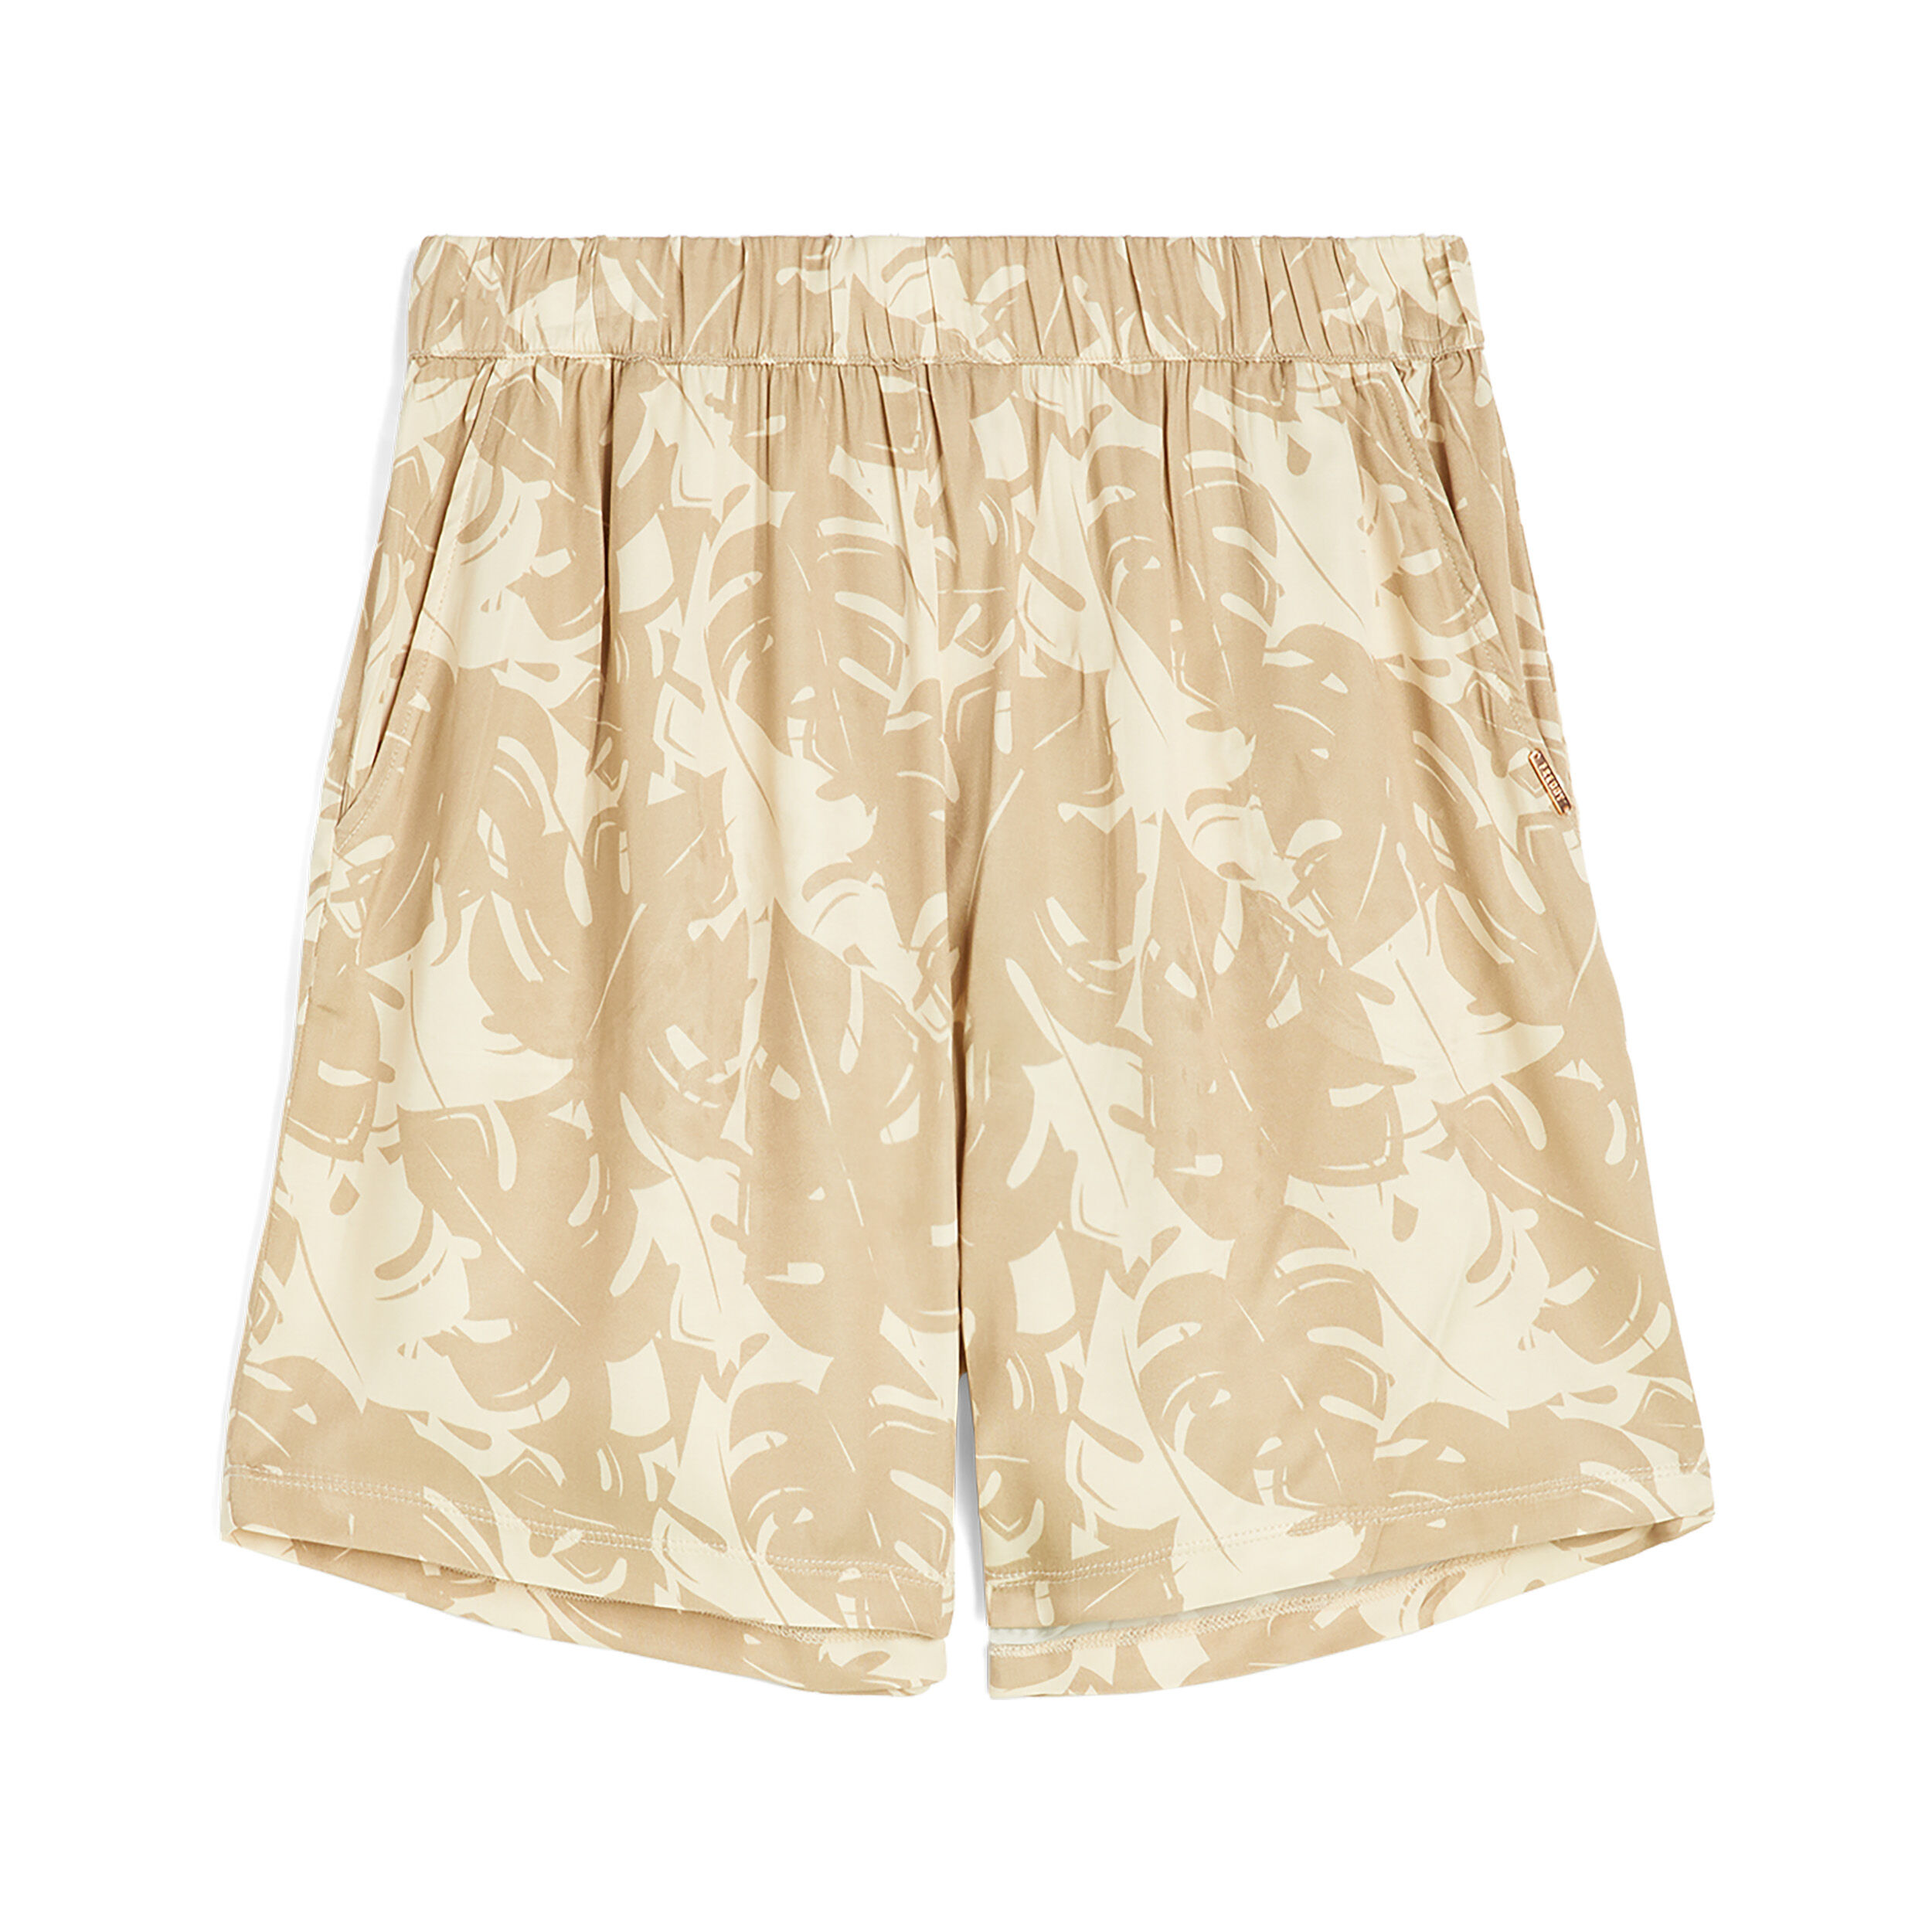 Freddy Pantaloni short donna in satin di viscosa fantasia tropical Beige And White Allover Flower Donna Extra Large